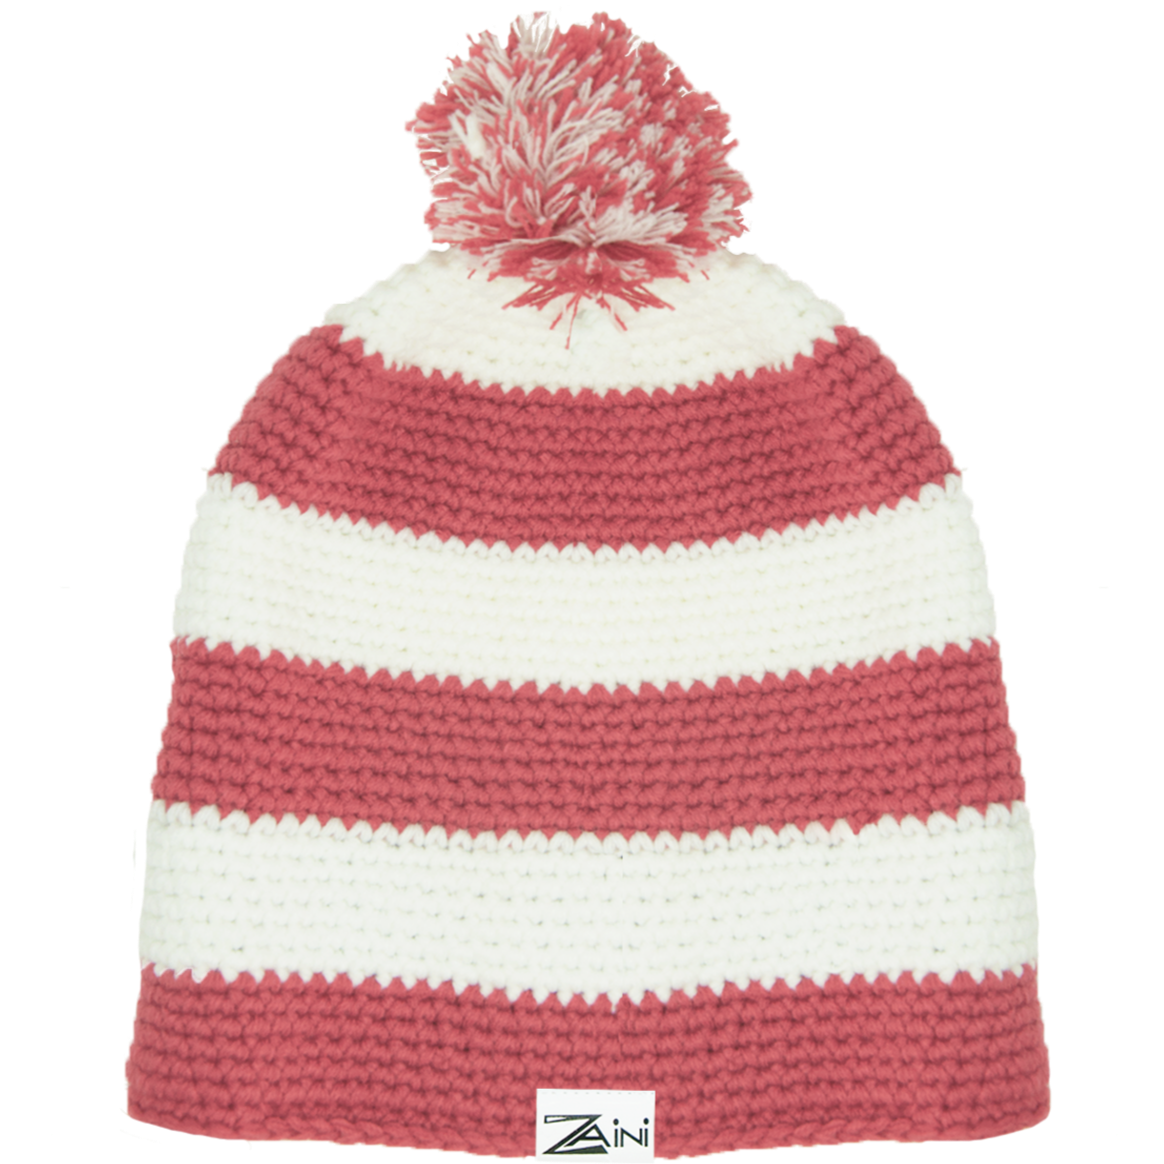 Limited Edition Rosie 'Fleece Lined' Beanie Bobble Hat